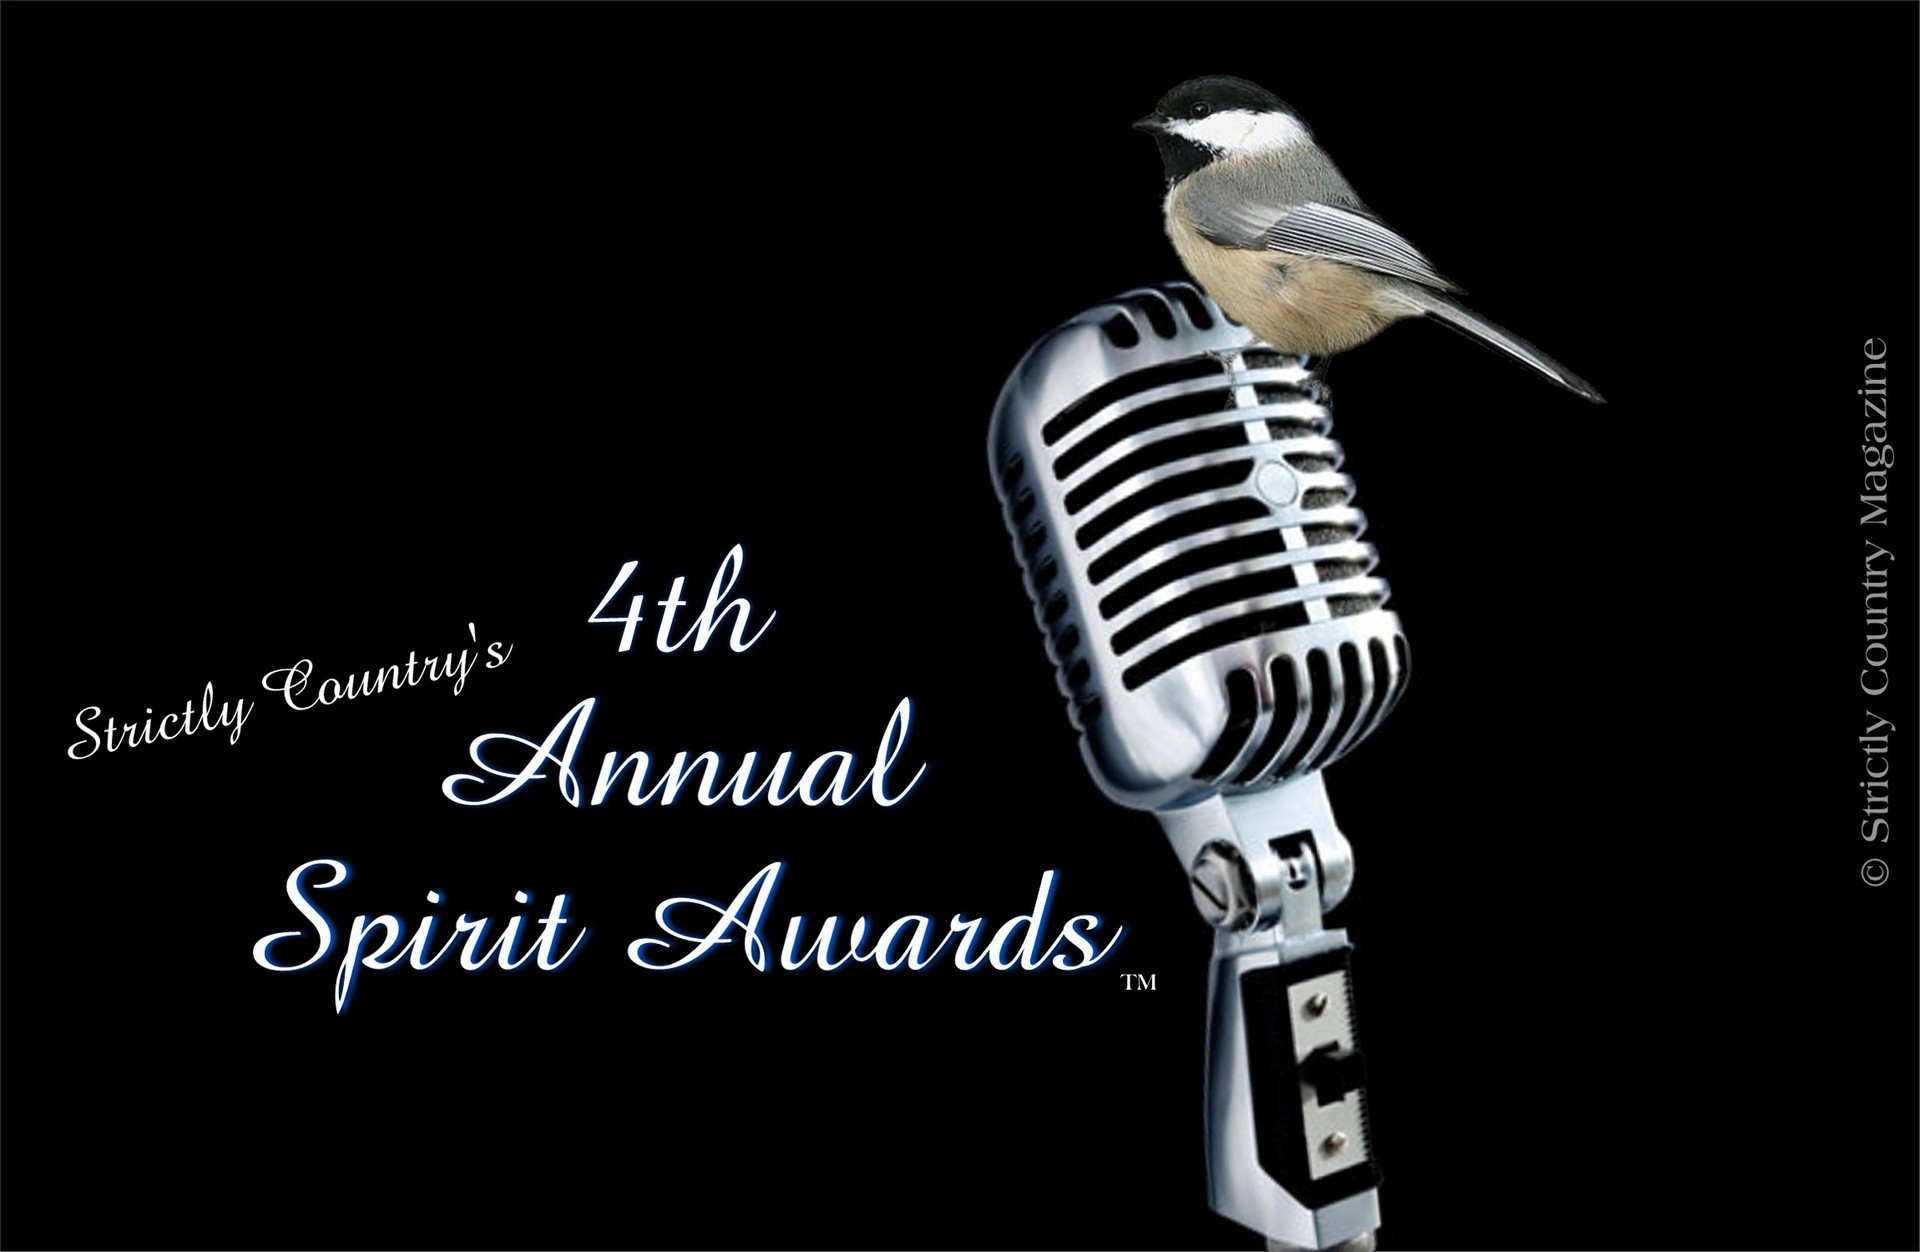 Strictly Country Magazine copyright 4th Annual Spirit Awards official logo